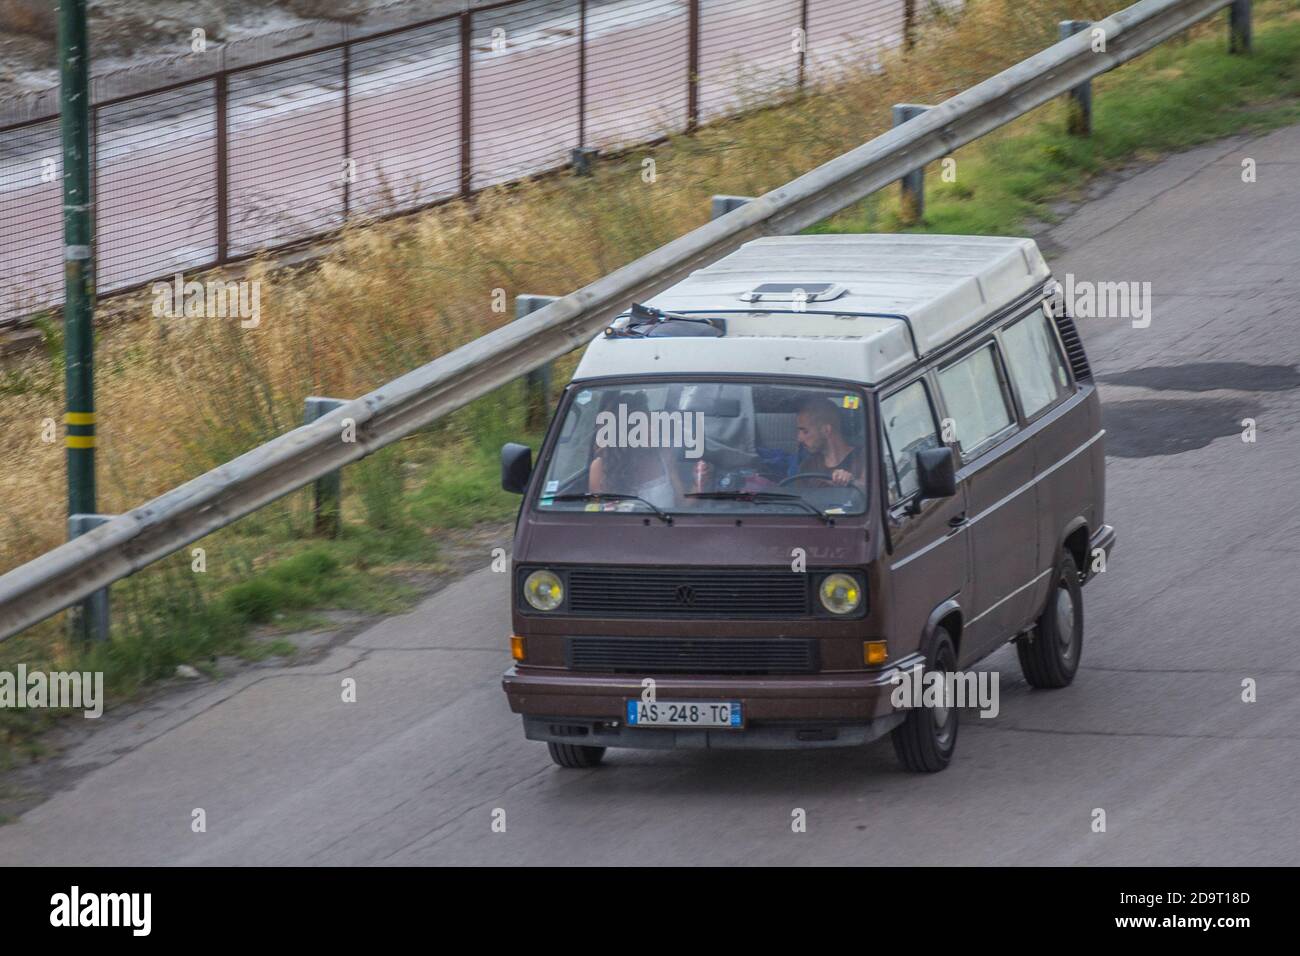 Driving a van on the street Stock Photo - Alamy